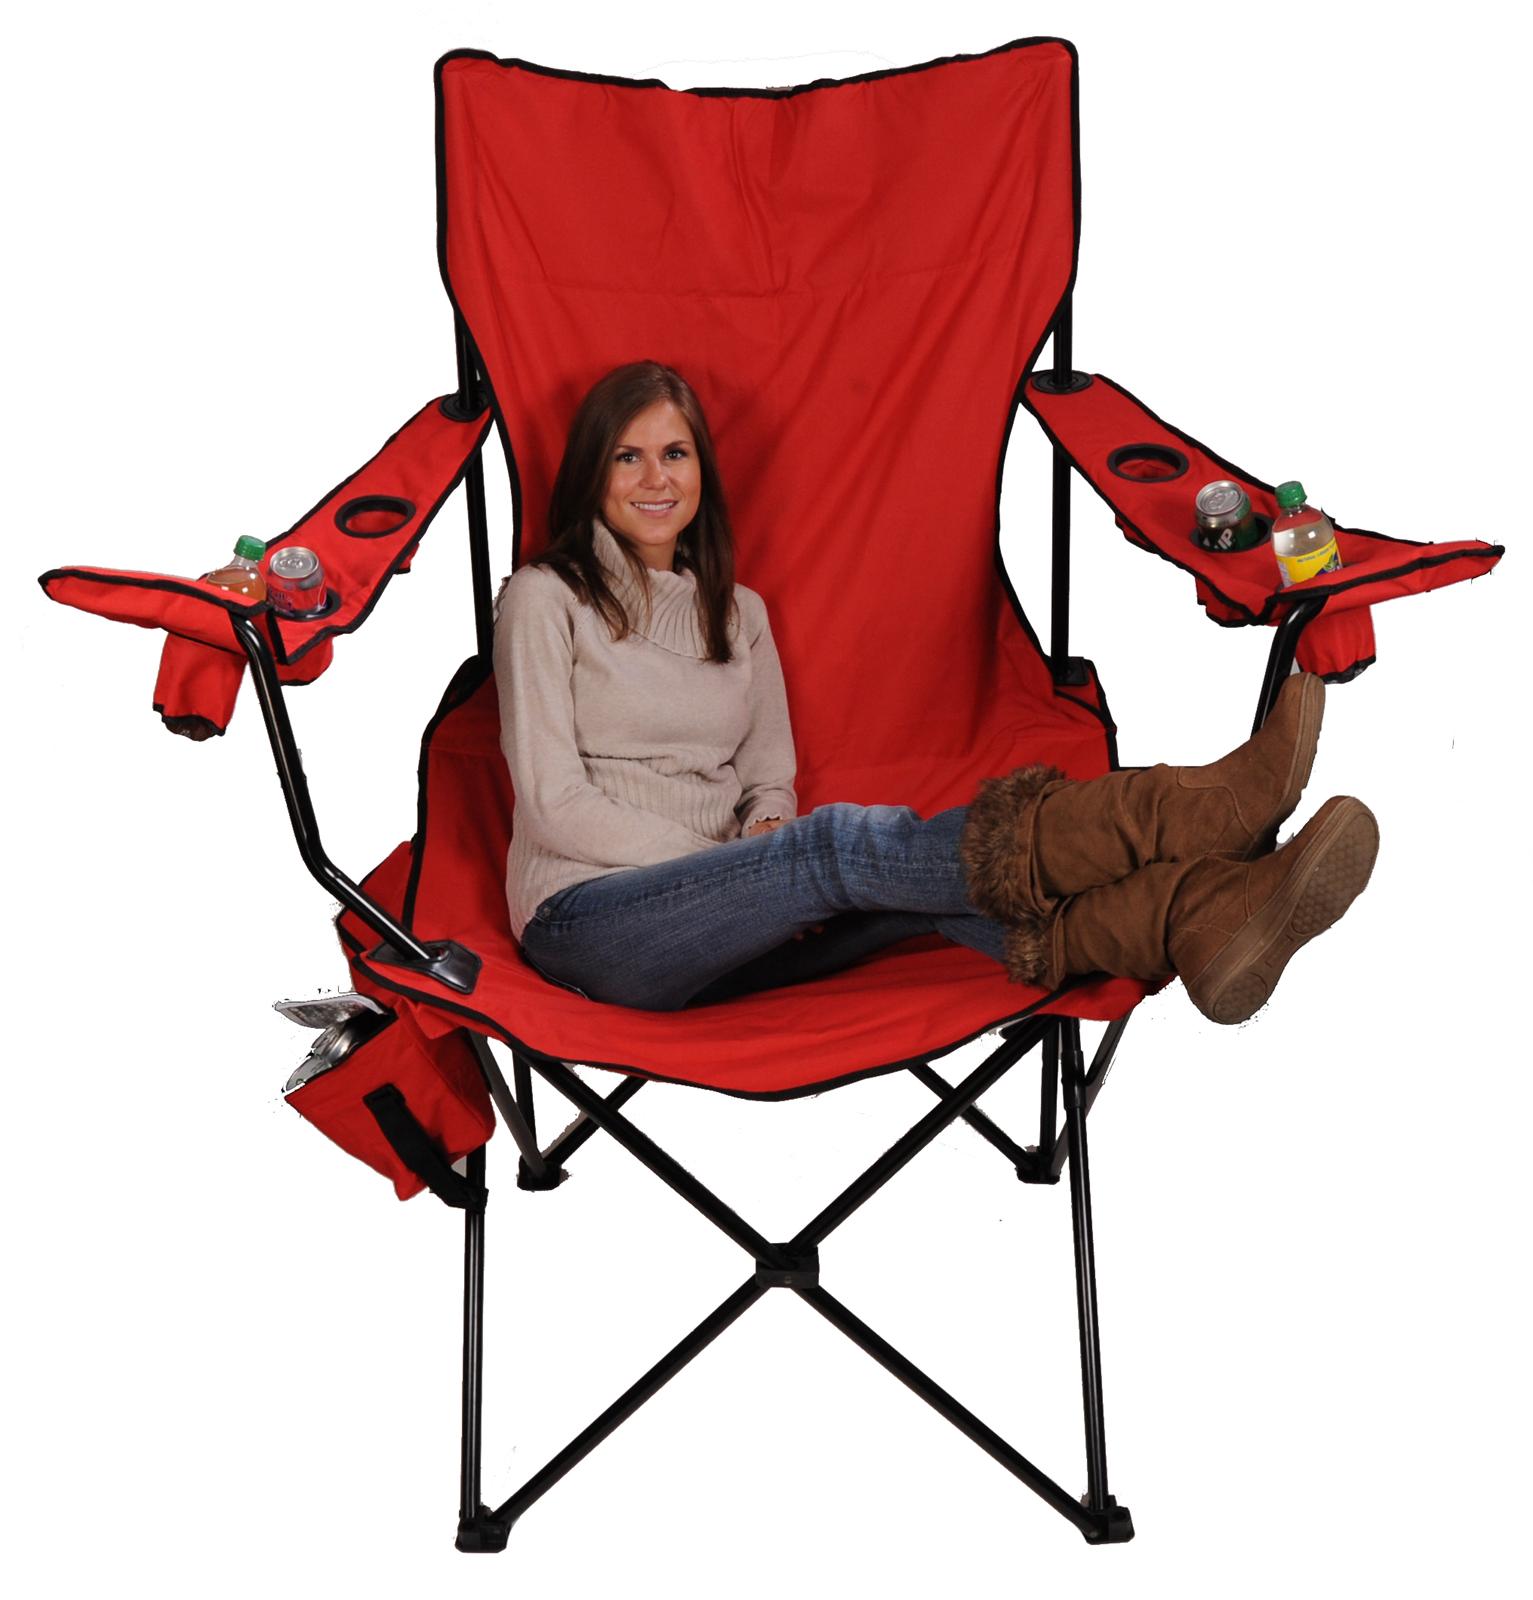 Red Kingpin Folding Chair 7002 - Free Shipping on Orders Over $99 at ...